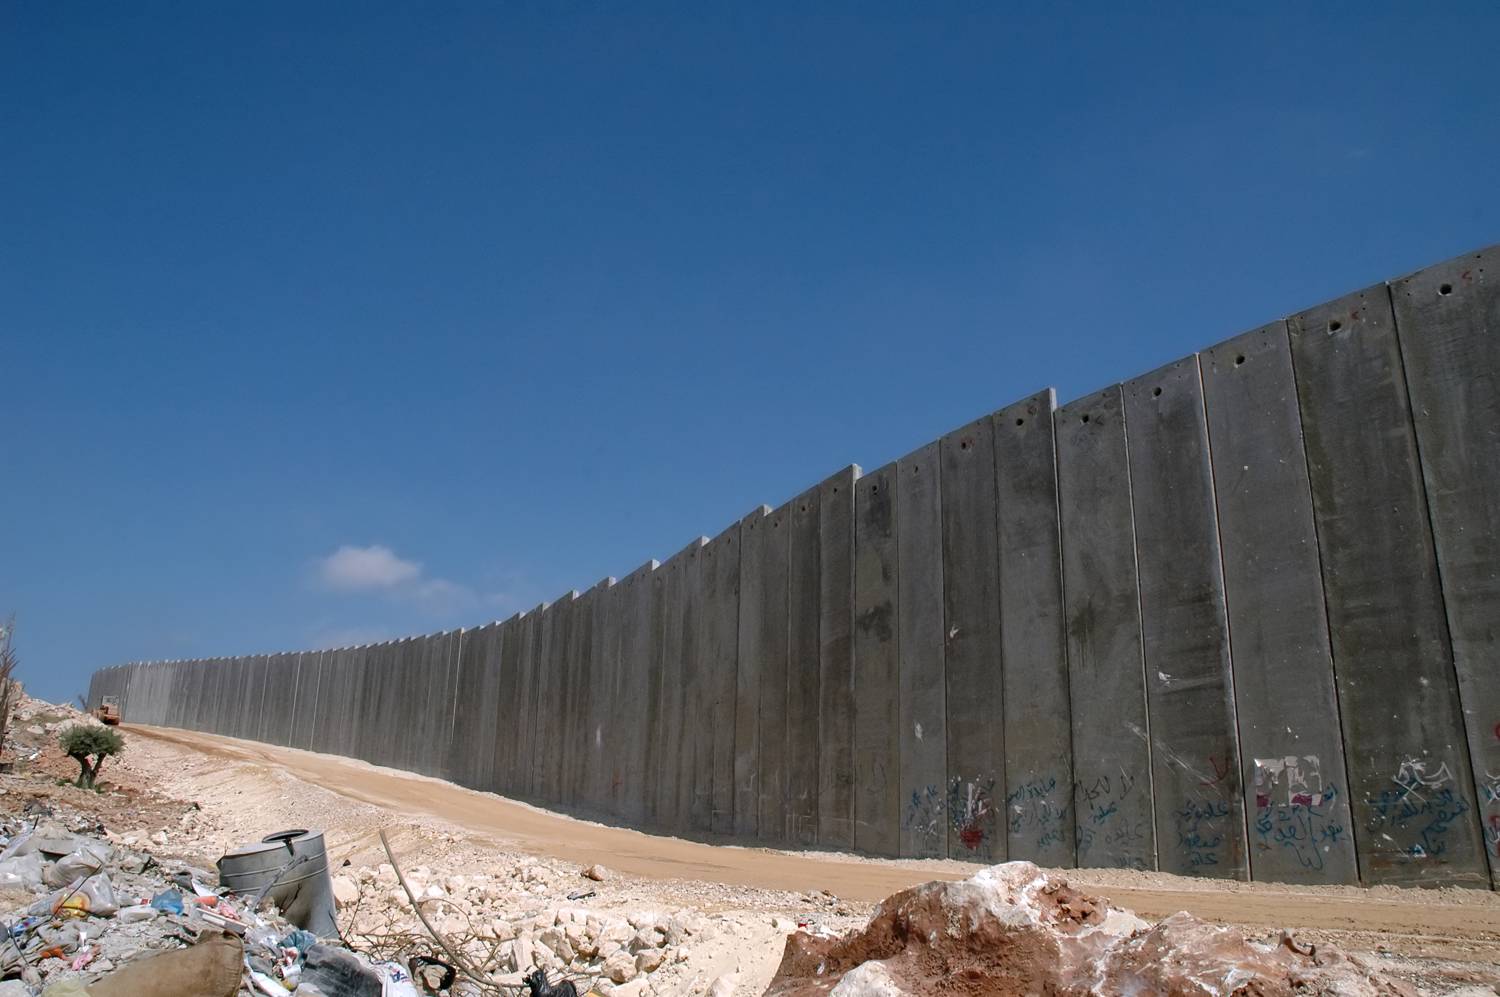 Israeli West Bank Barrier. Photo: Justin McIntosh / Wikimedia Commons / CC BY 2.0